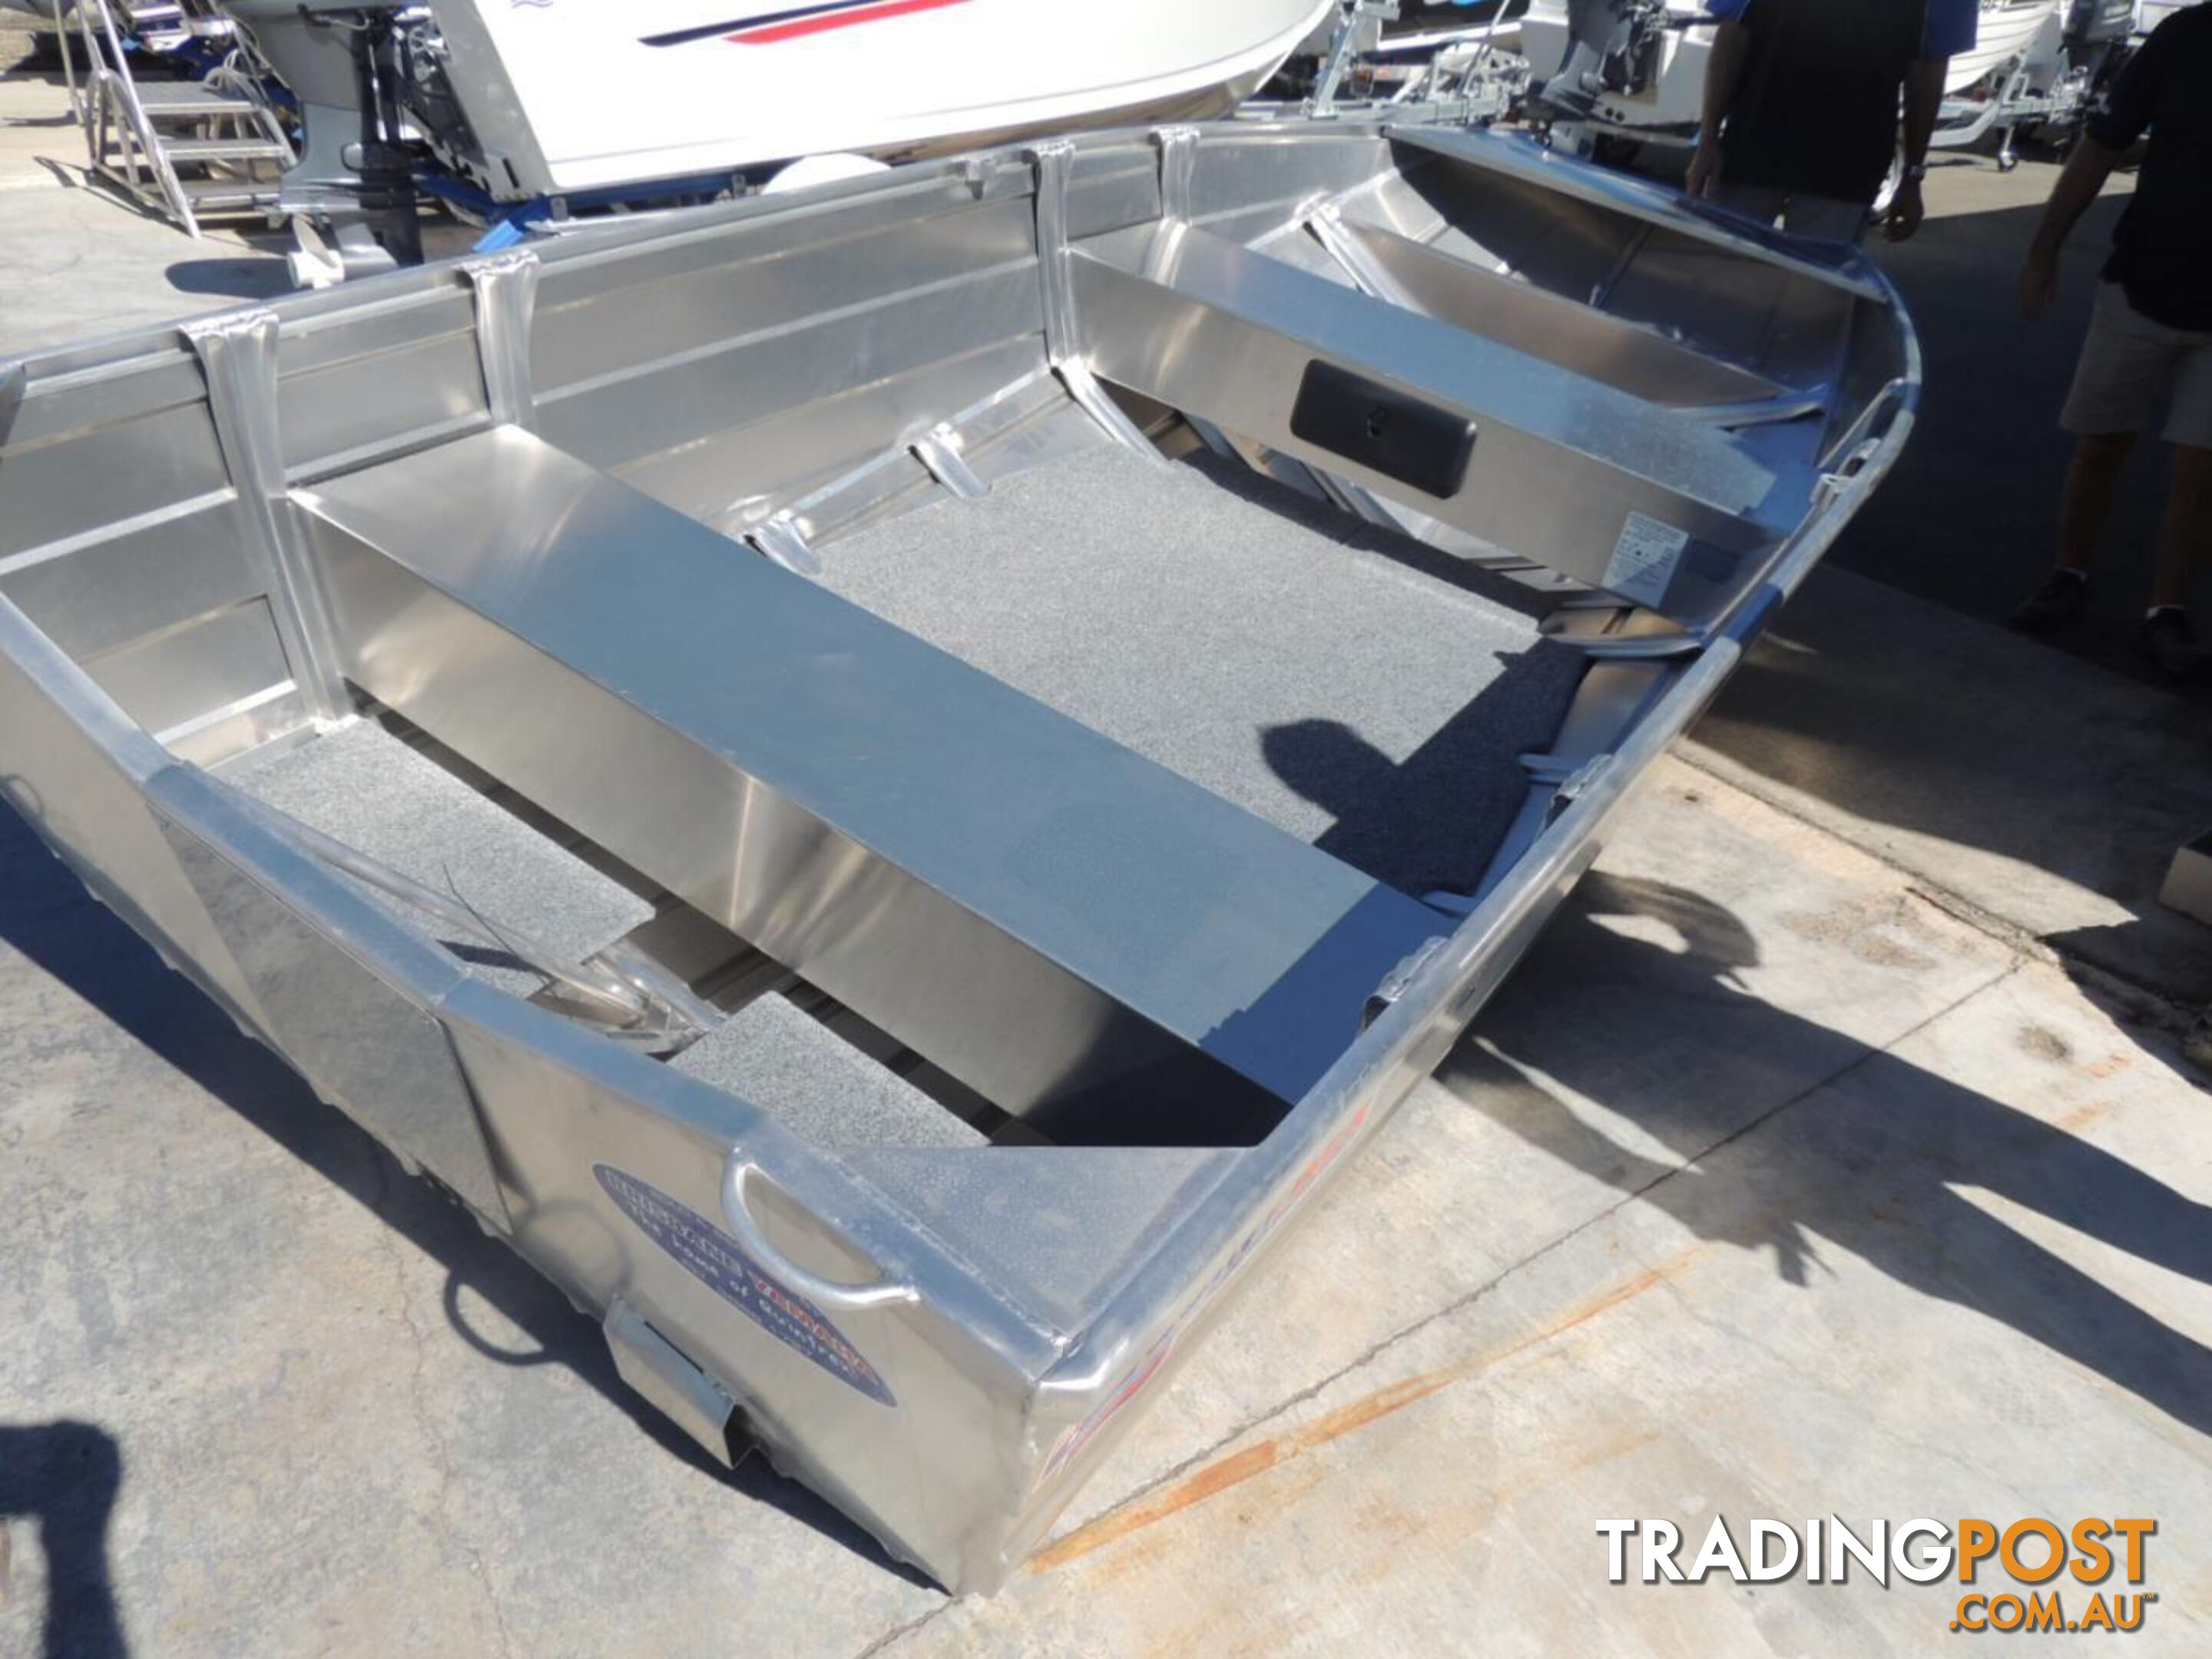 Quintrex F370 Outback Explorer -  Pack 1 HULL ONLY